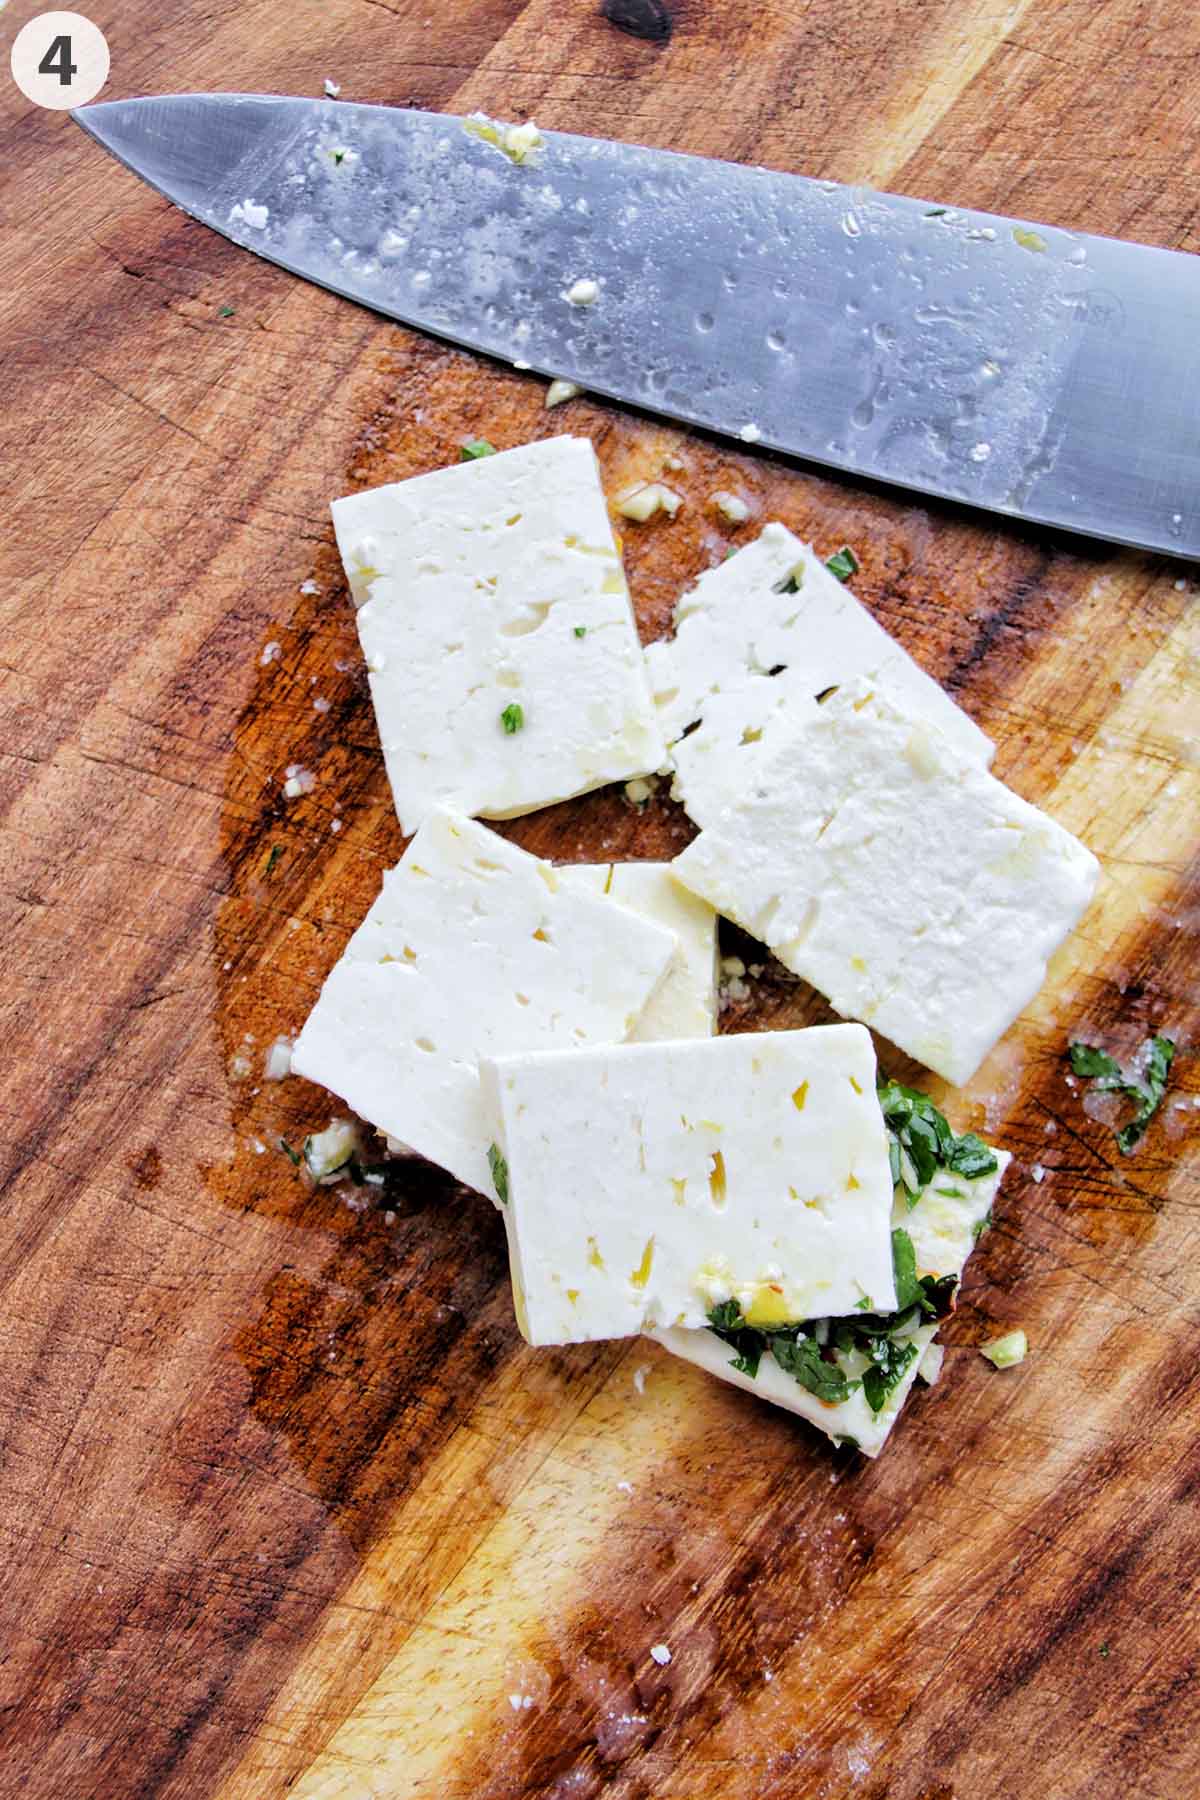 numbered photo showing sliced feta cheese squares on a cutting board.